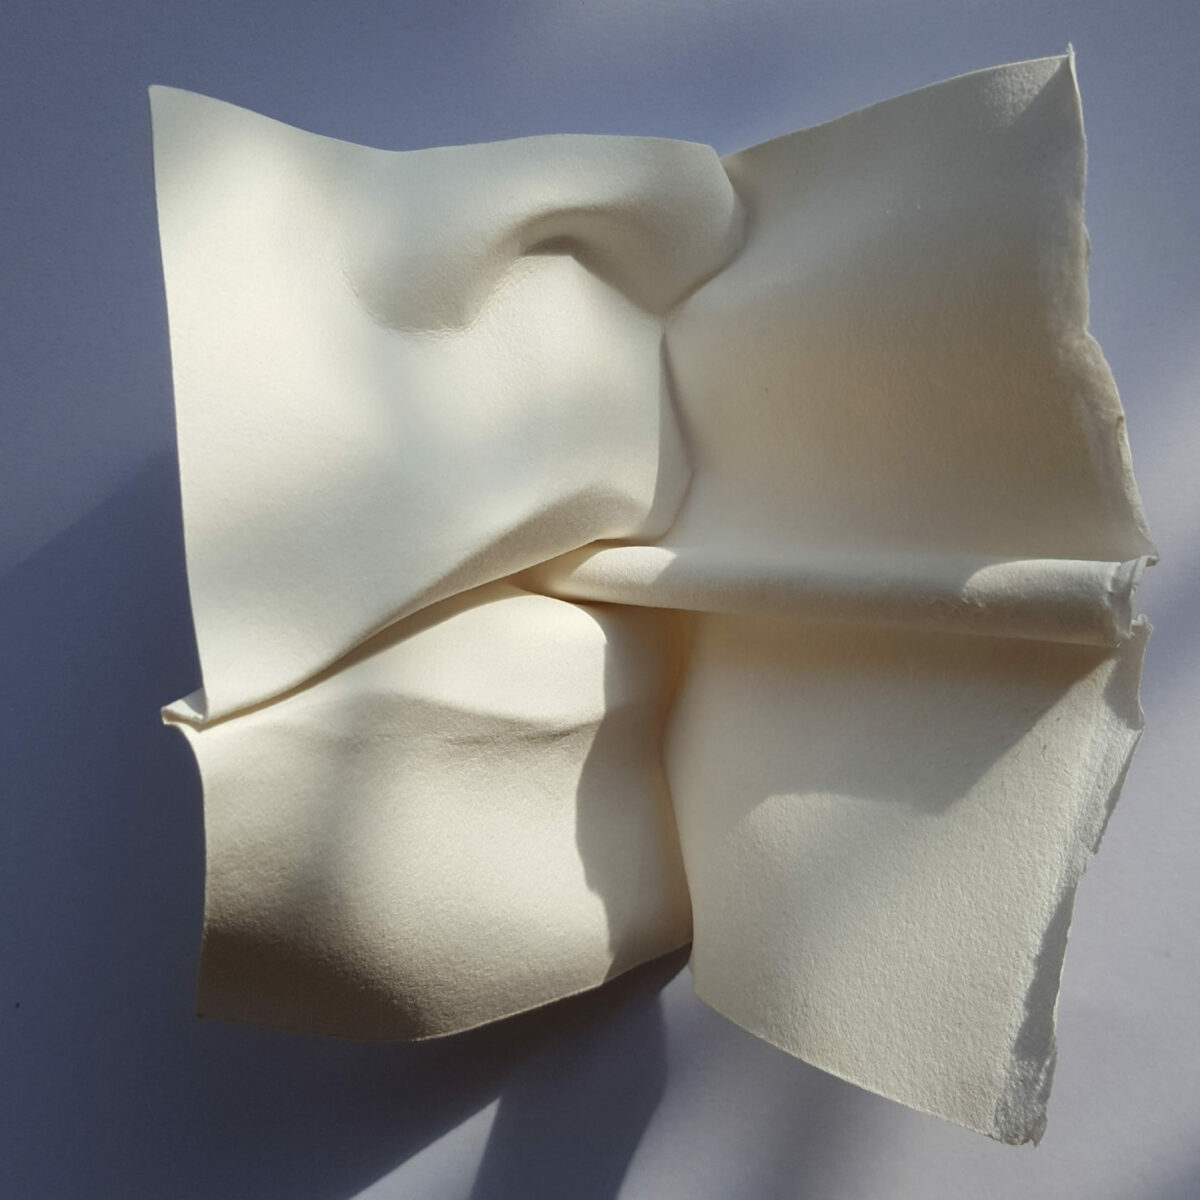 Fascinating Facial Sculptures Made From Folded Paper Sheets By Polly Verity (14)